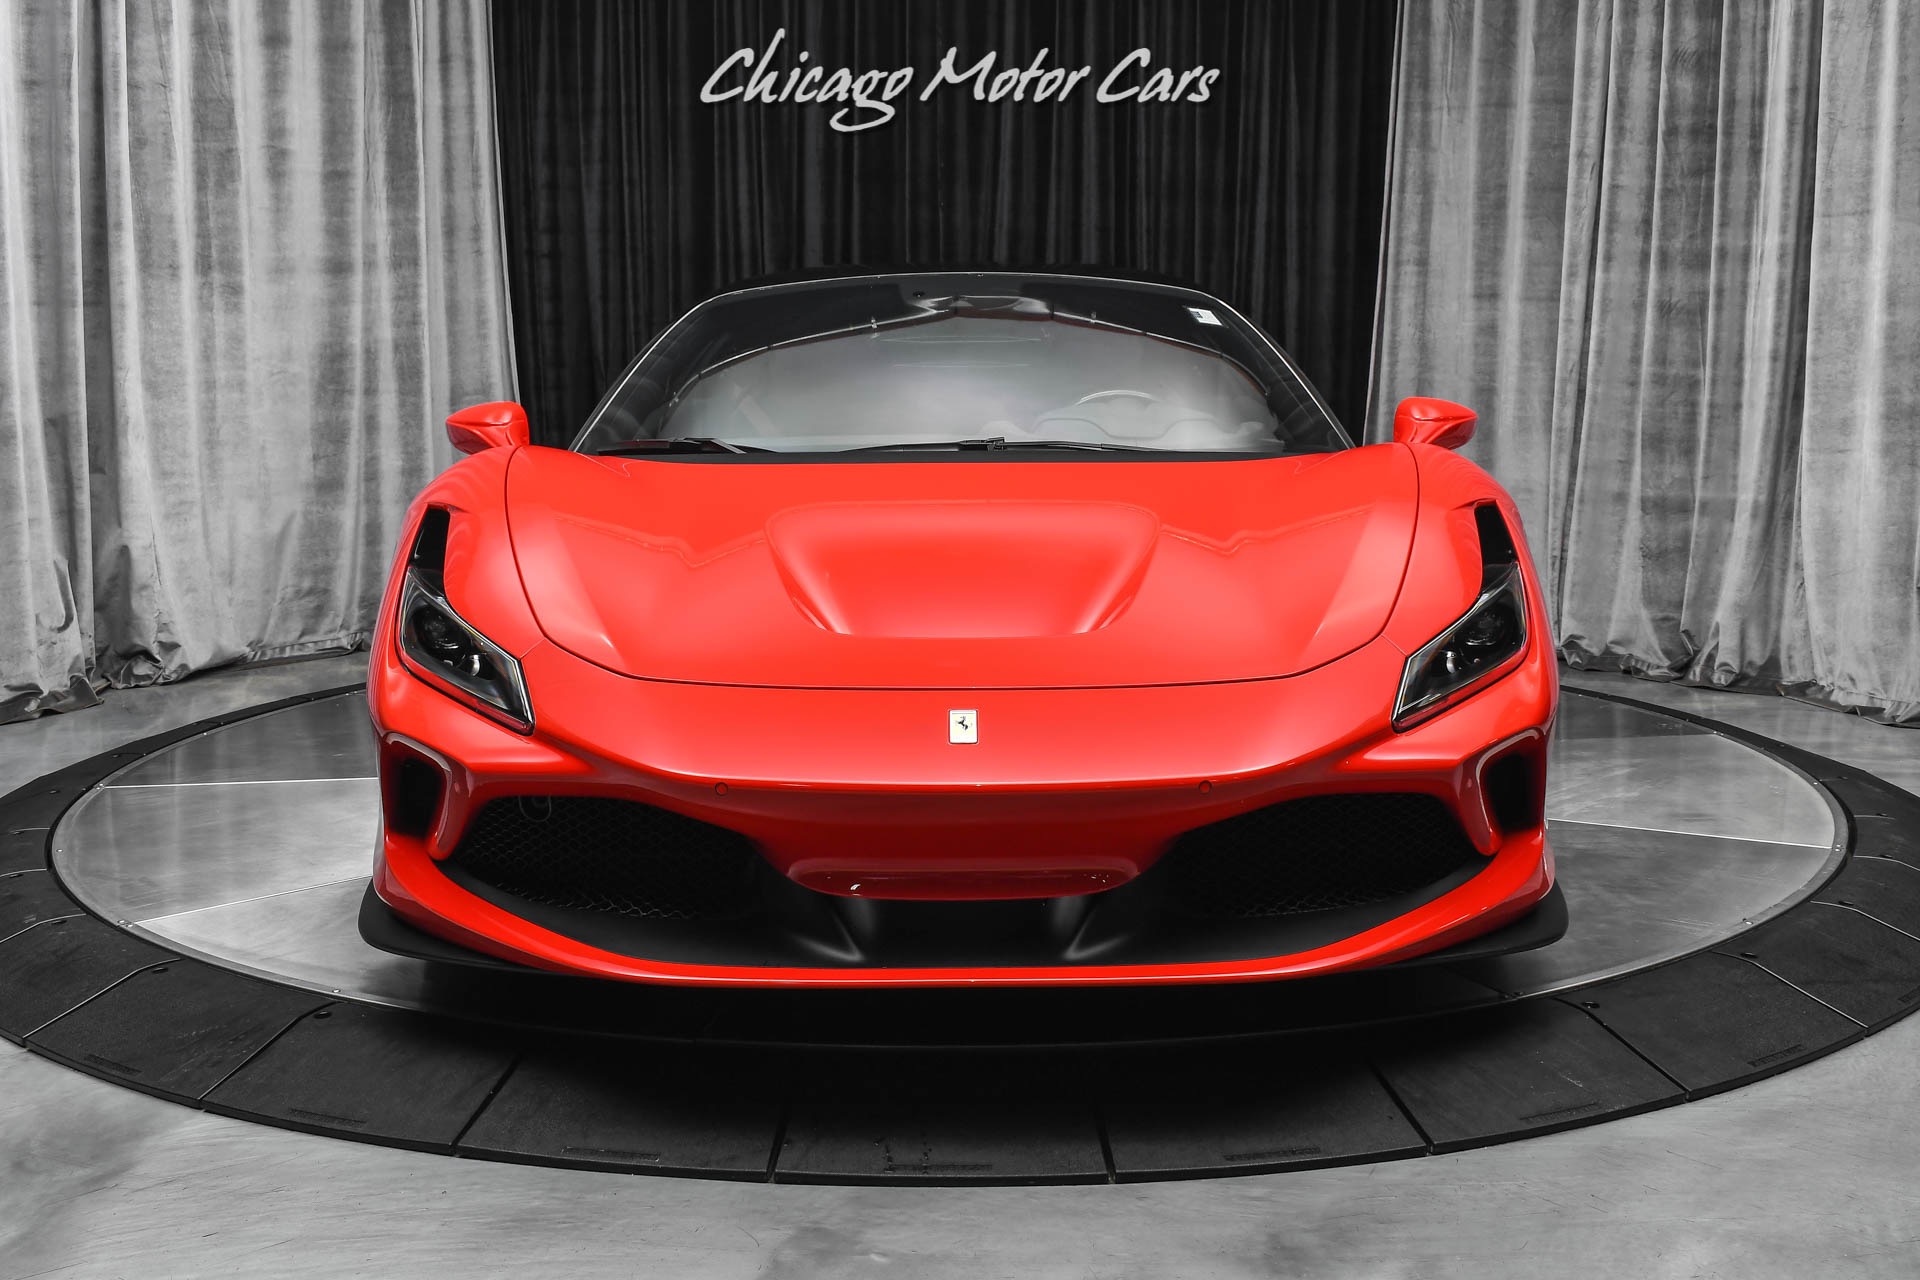 Used-2020-Ferrari-F8-Tributo-Coupe-Original-MSRP-361755-Carbon-Fiber-Two-Tone-Body-Paint-Loaded